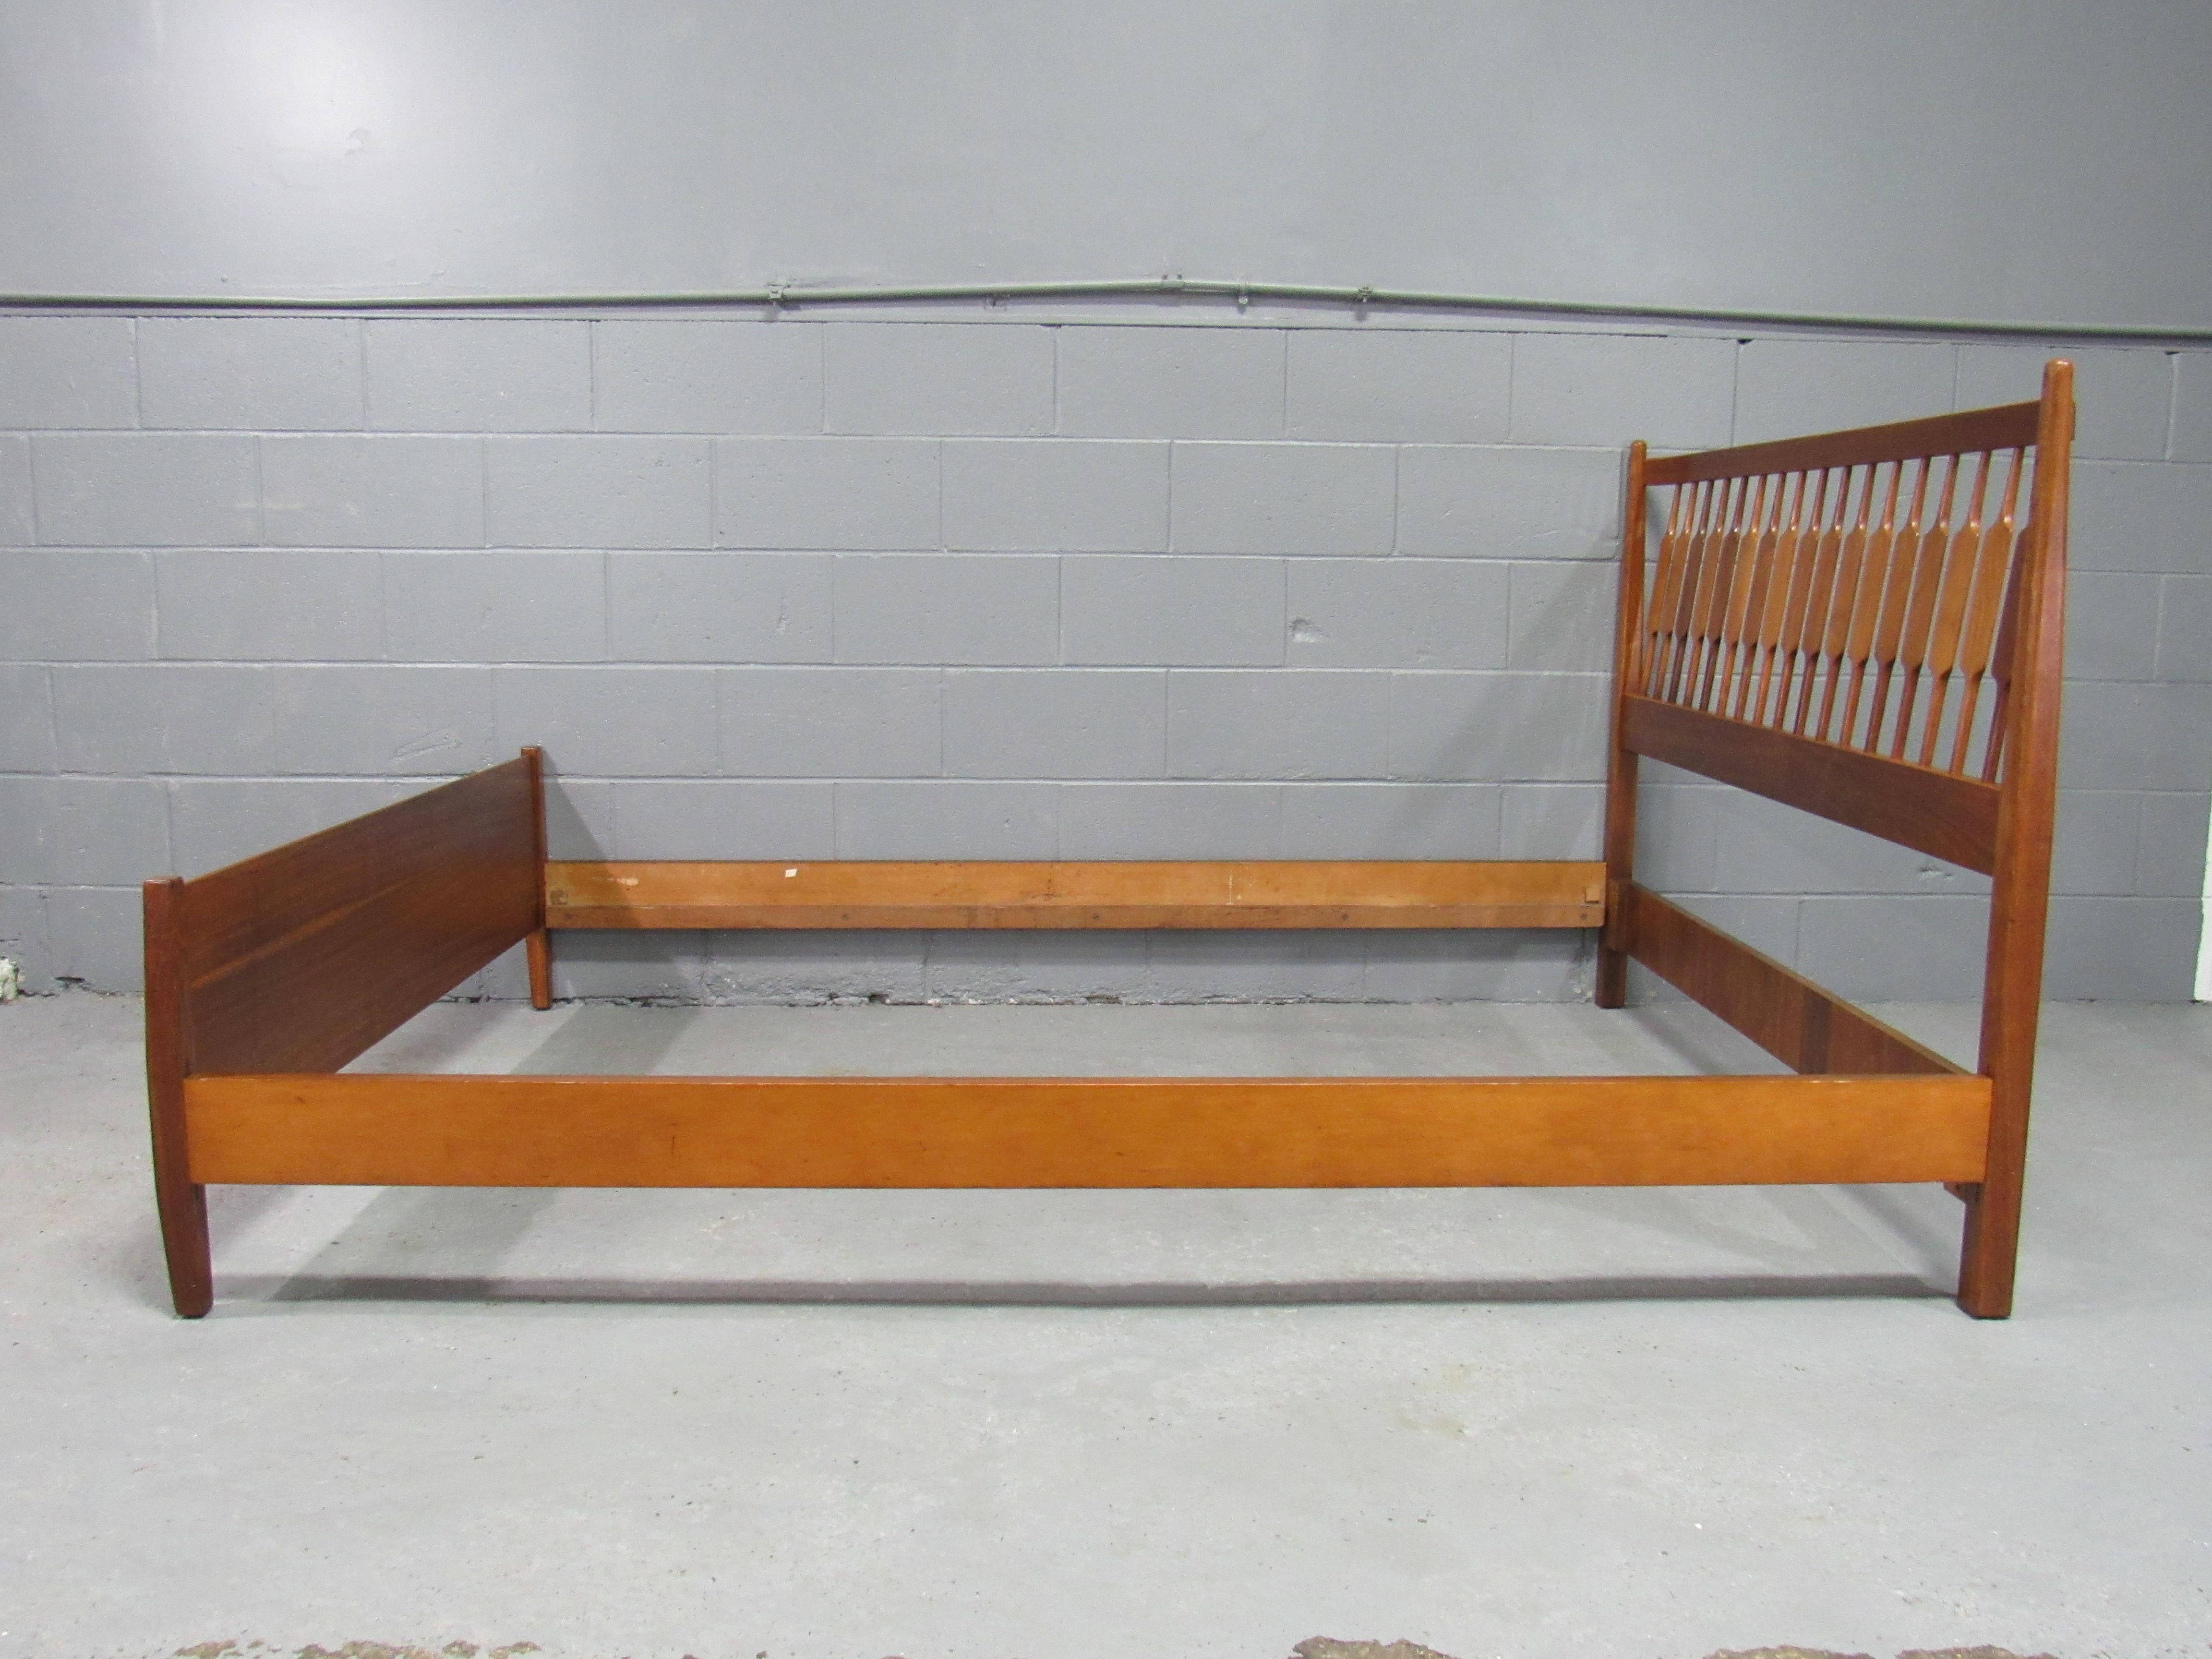 North American 1960s Mid-Century Modern Solid Walnut Full Double Bed by Kipp Stewart for Drexel